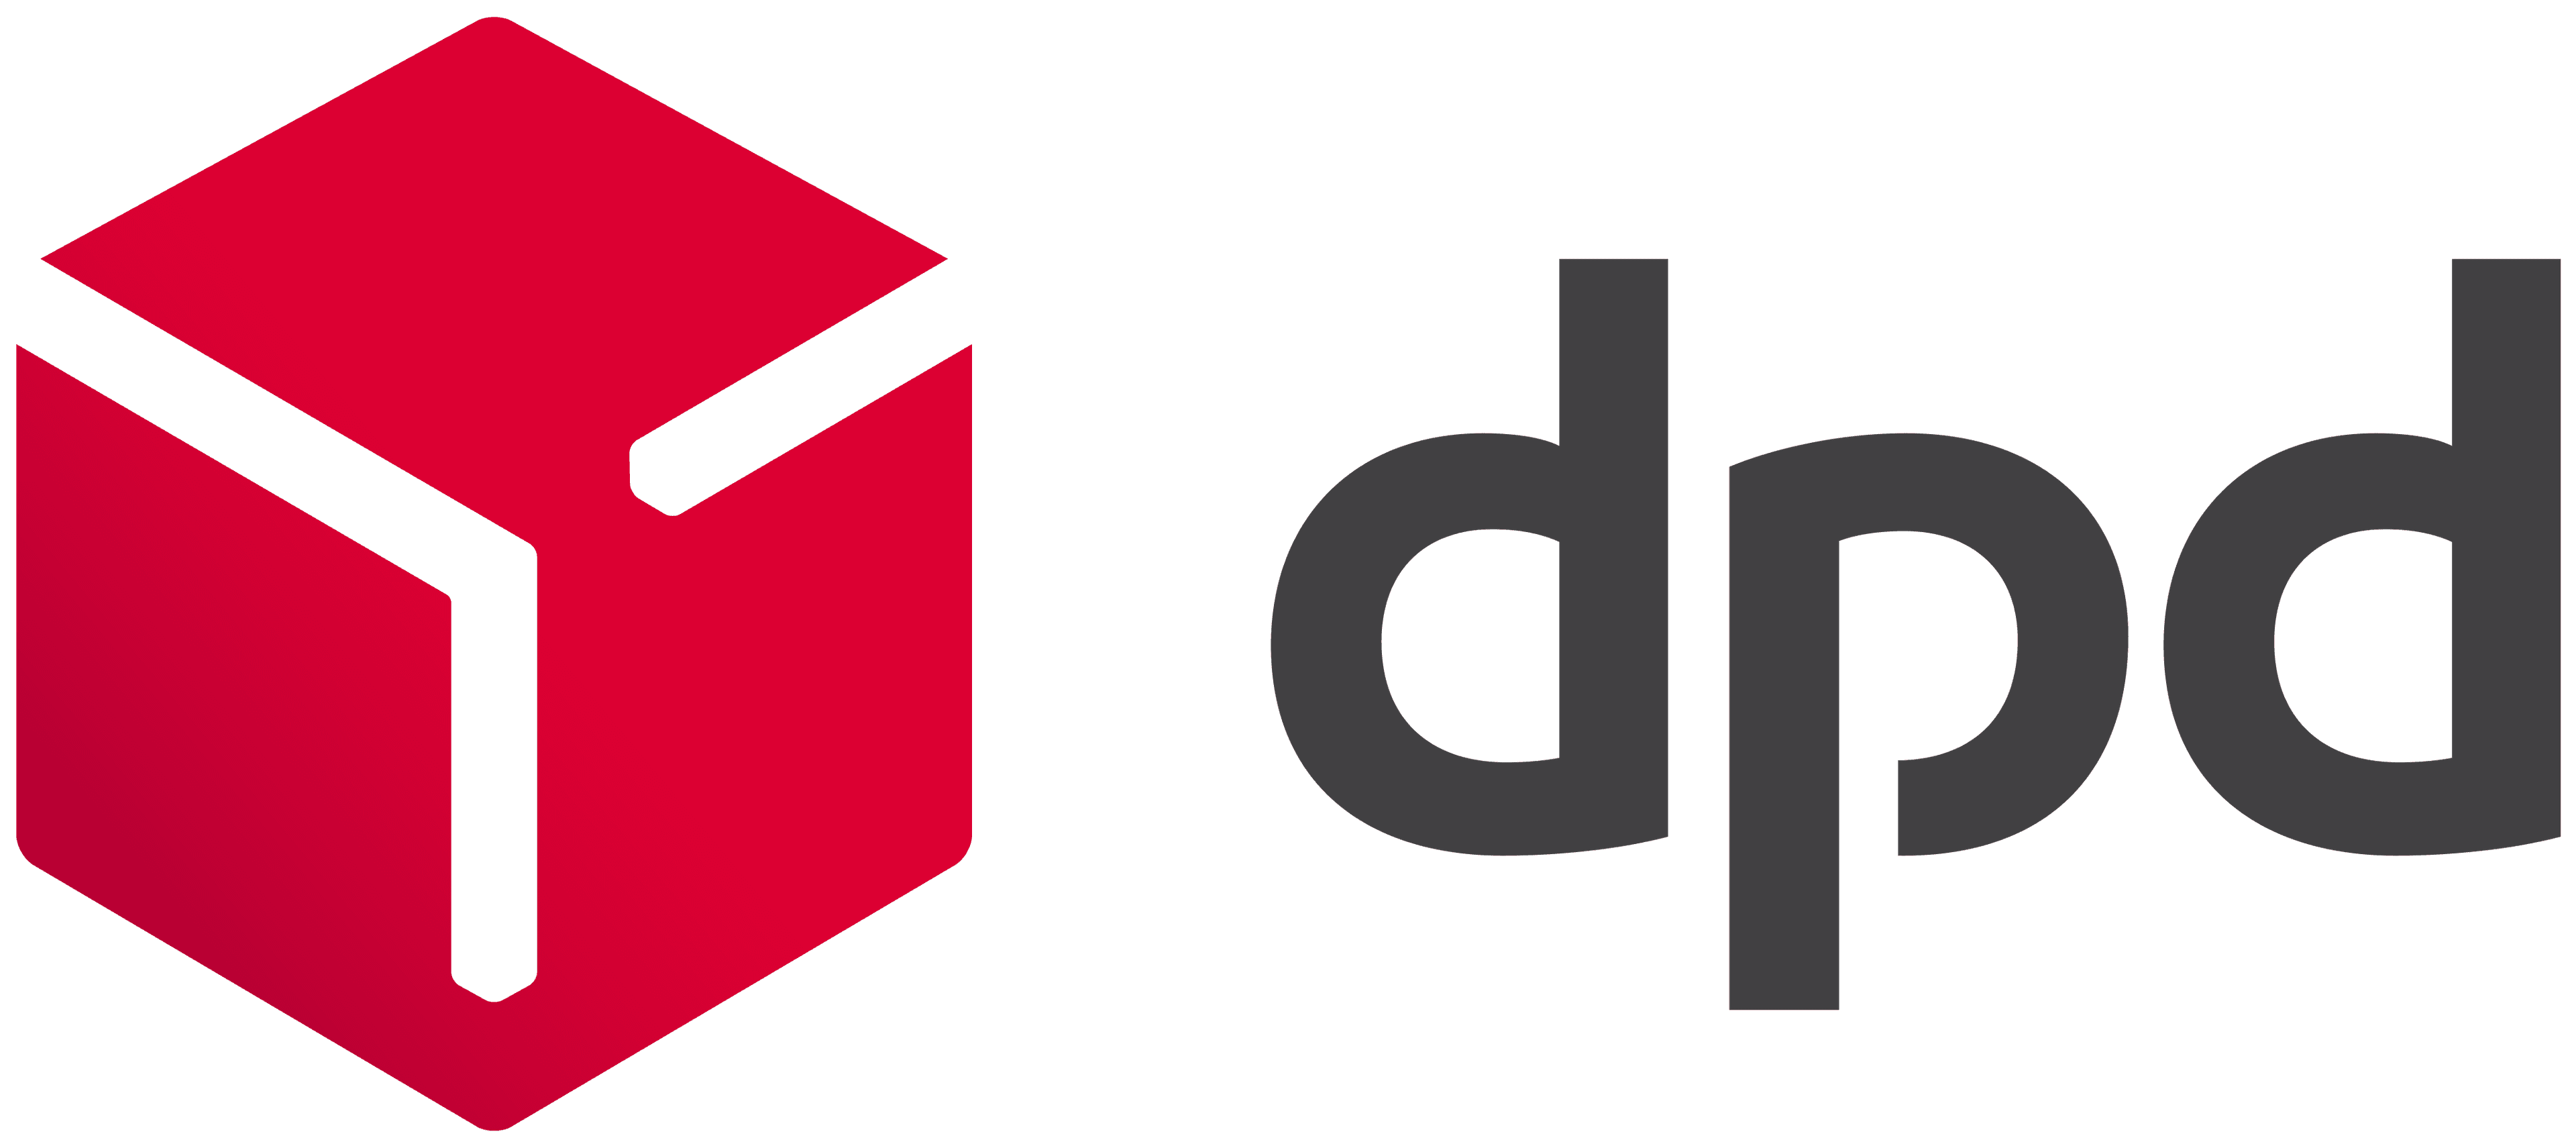 gallery picture : DPD_logo(red)2015.png